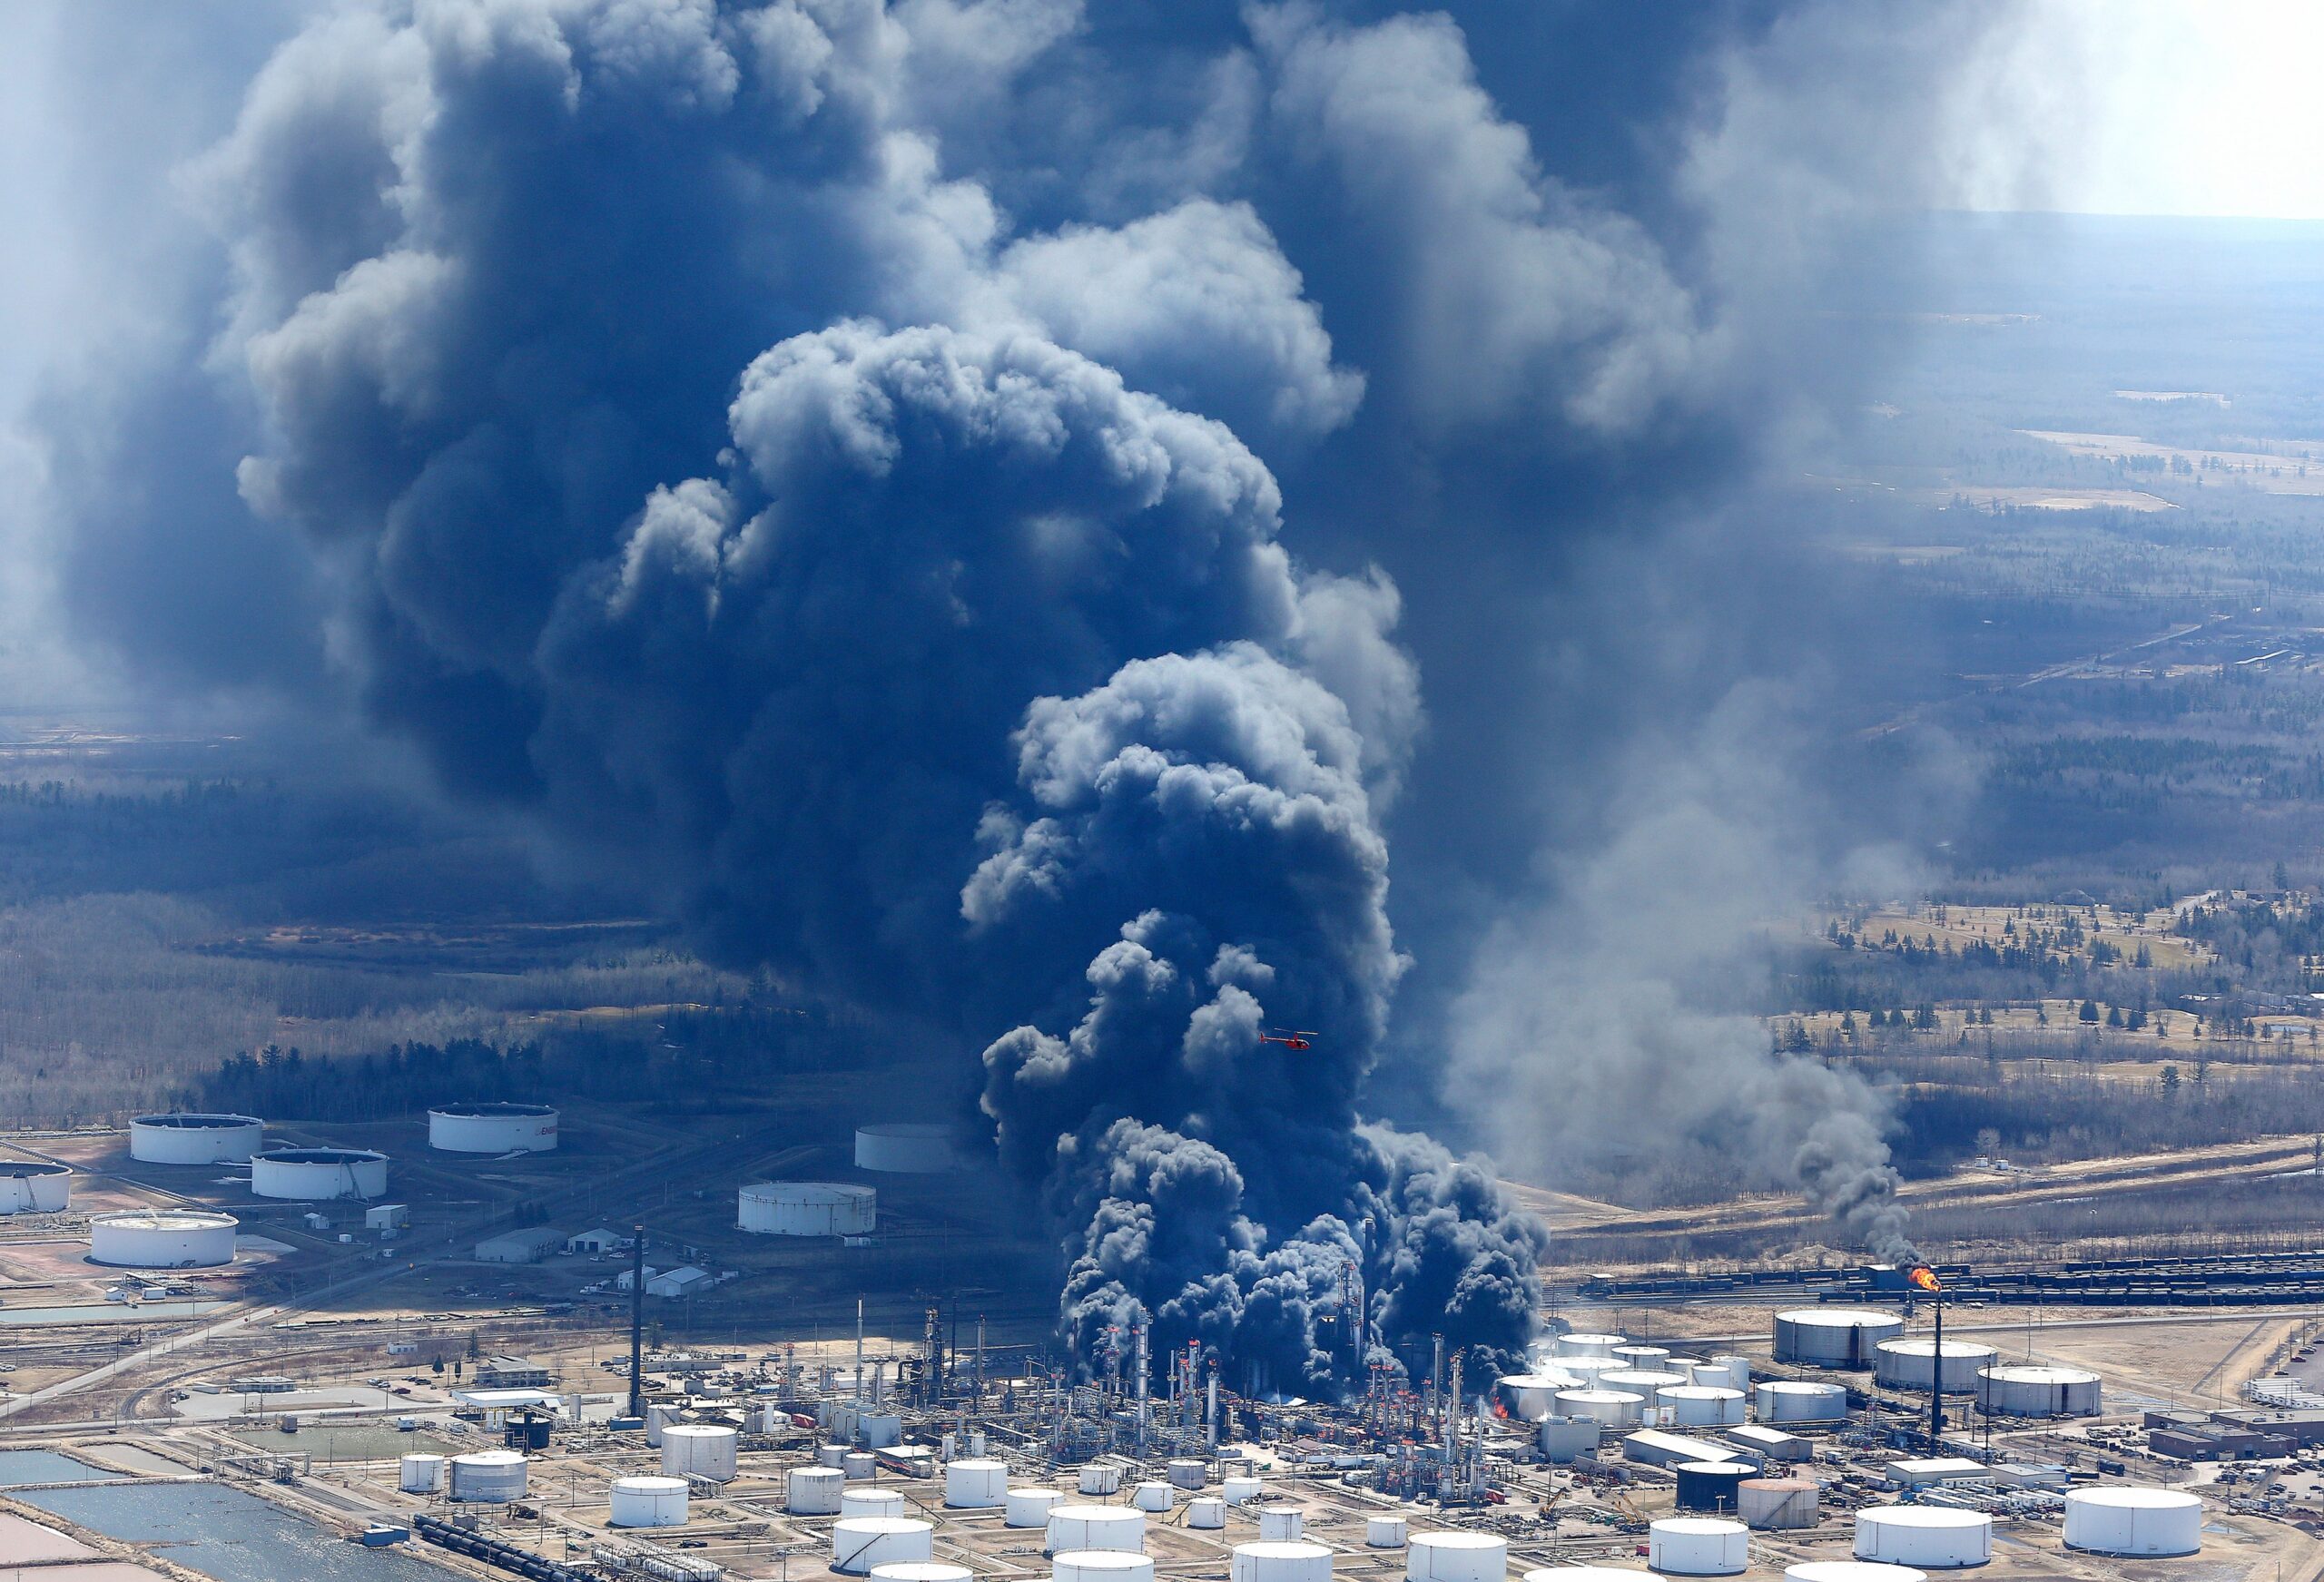 Fire Out, Evacuation Orders Lifted After Explosions At Superior Oil Refinery